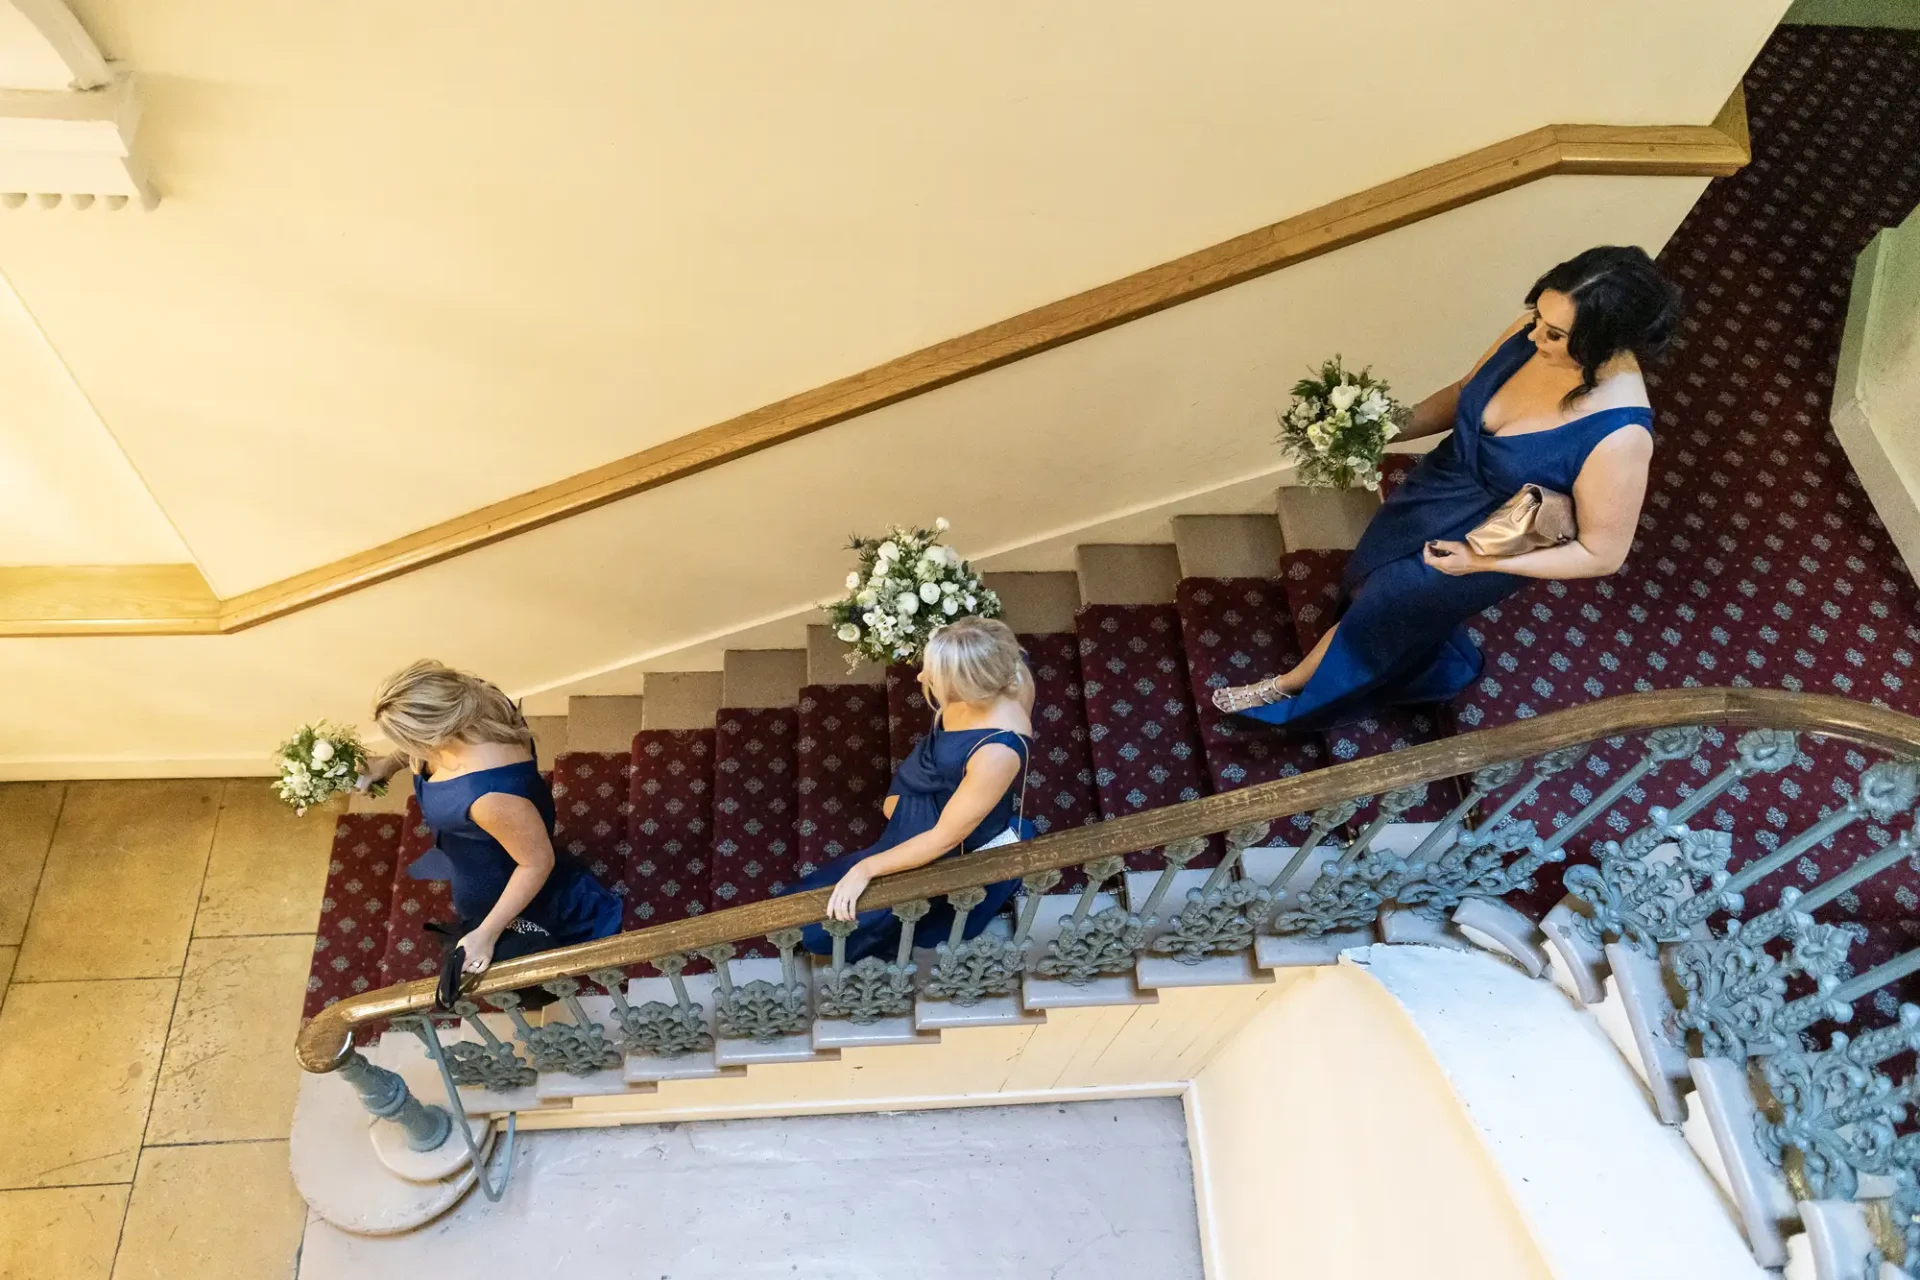 Two women and a girl in blue dresses descend a grand staircase, holding bouquets; another woman sits on the steps.